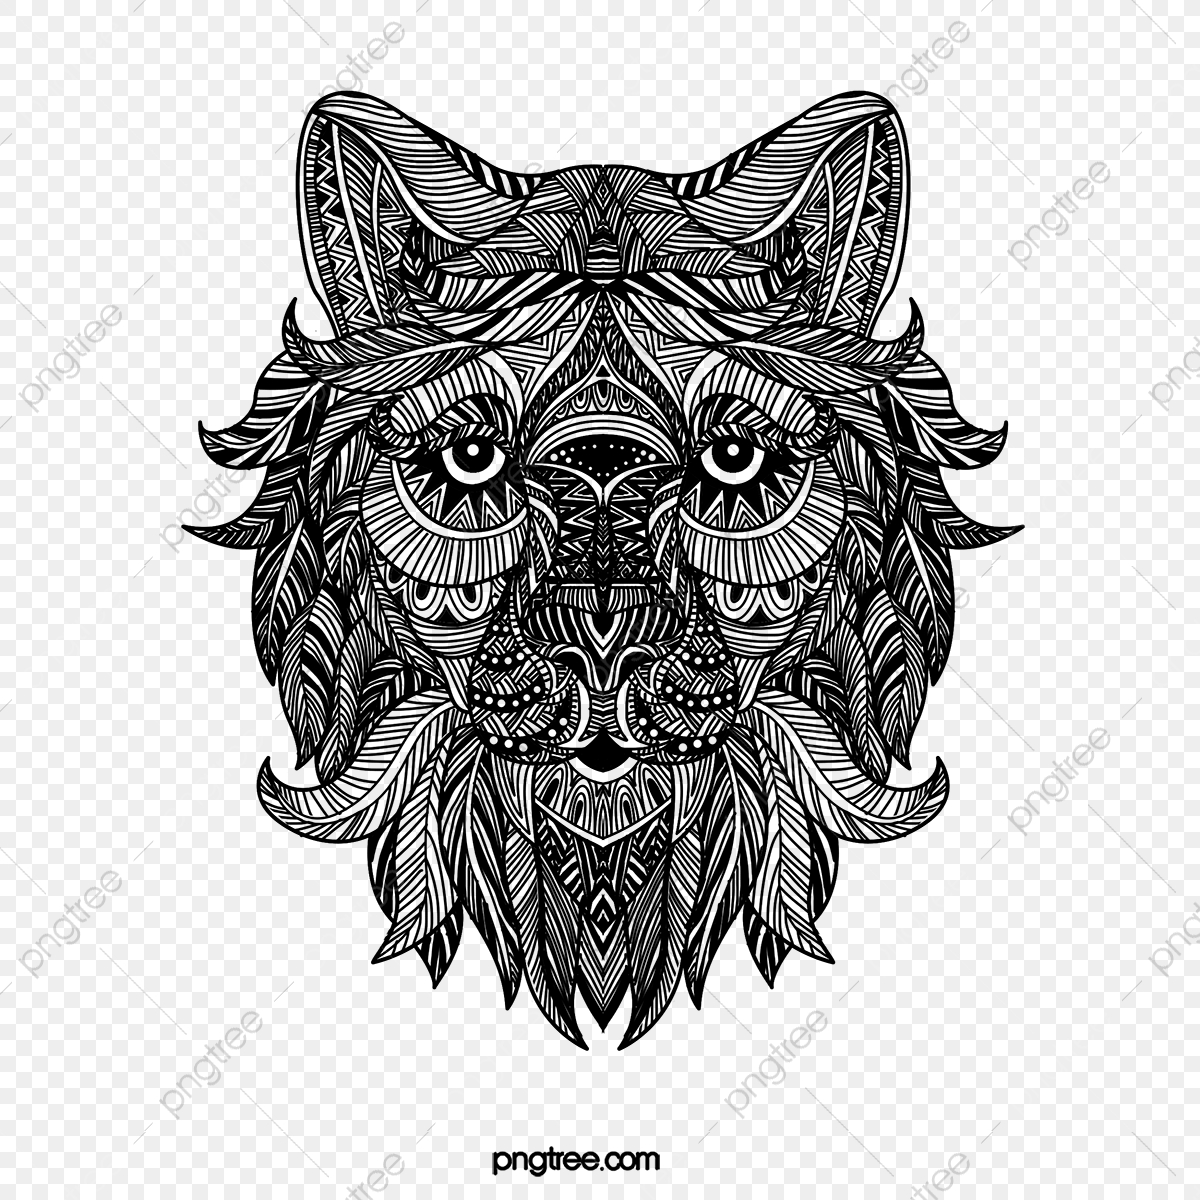 pngtree-zentangle-style-lion-head-png-image_5208969